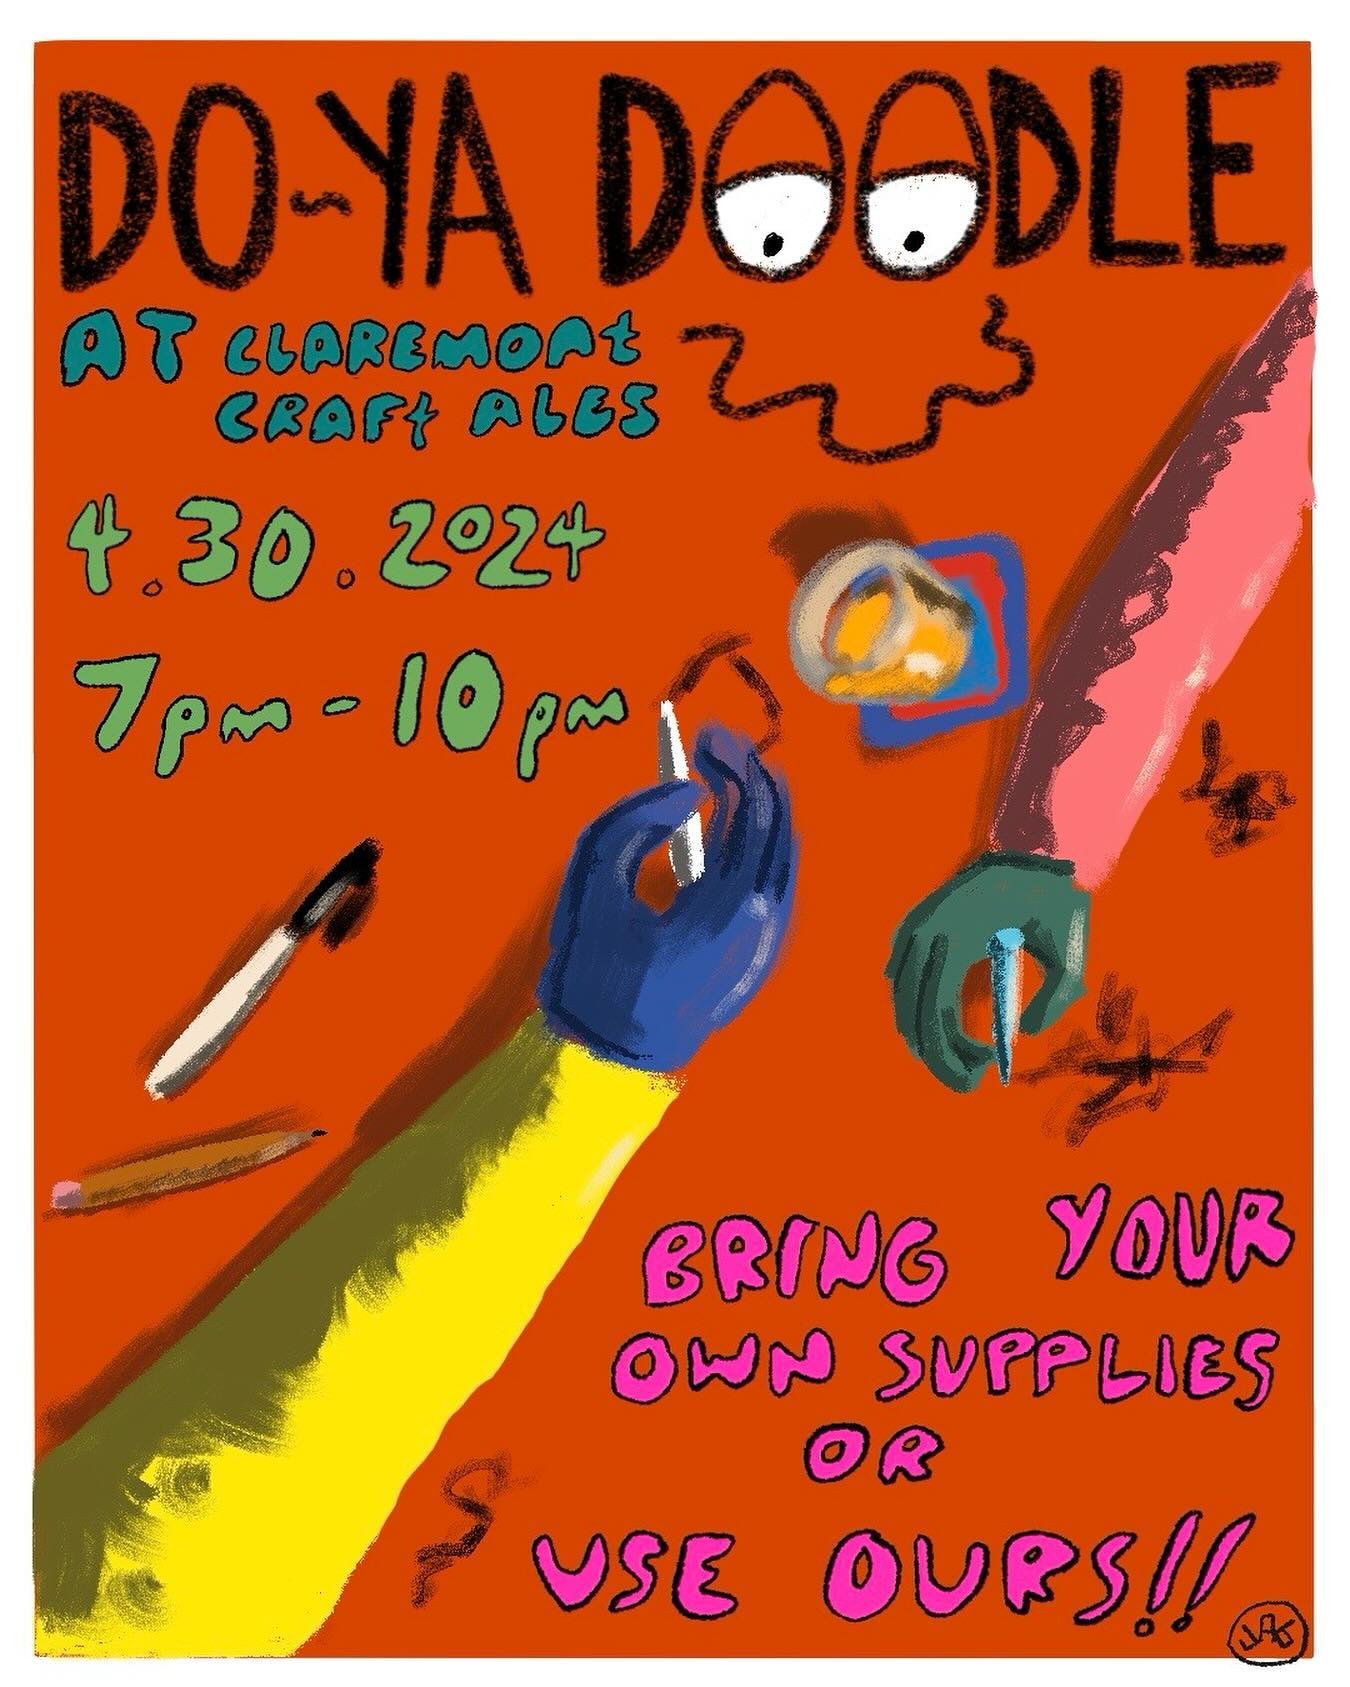 We&rsquo;re doodling, eating yummy tacos, and drinking delicious beers this evening! No invitation needed- come join us!!

@hoppy_tacos will be here starting at 4pm and Do Ya Doodle starts at 7pm. Bring your own pens or use ours. See you soon!

#doya